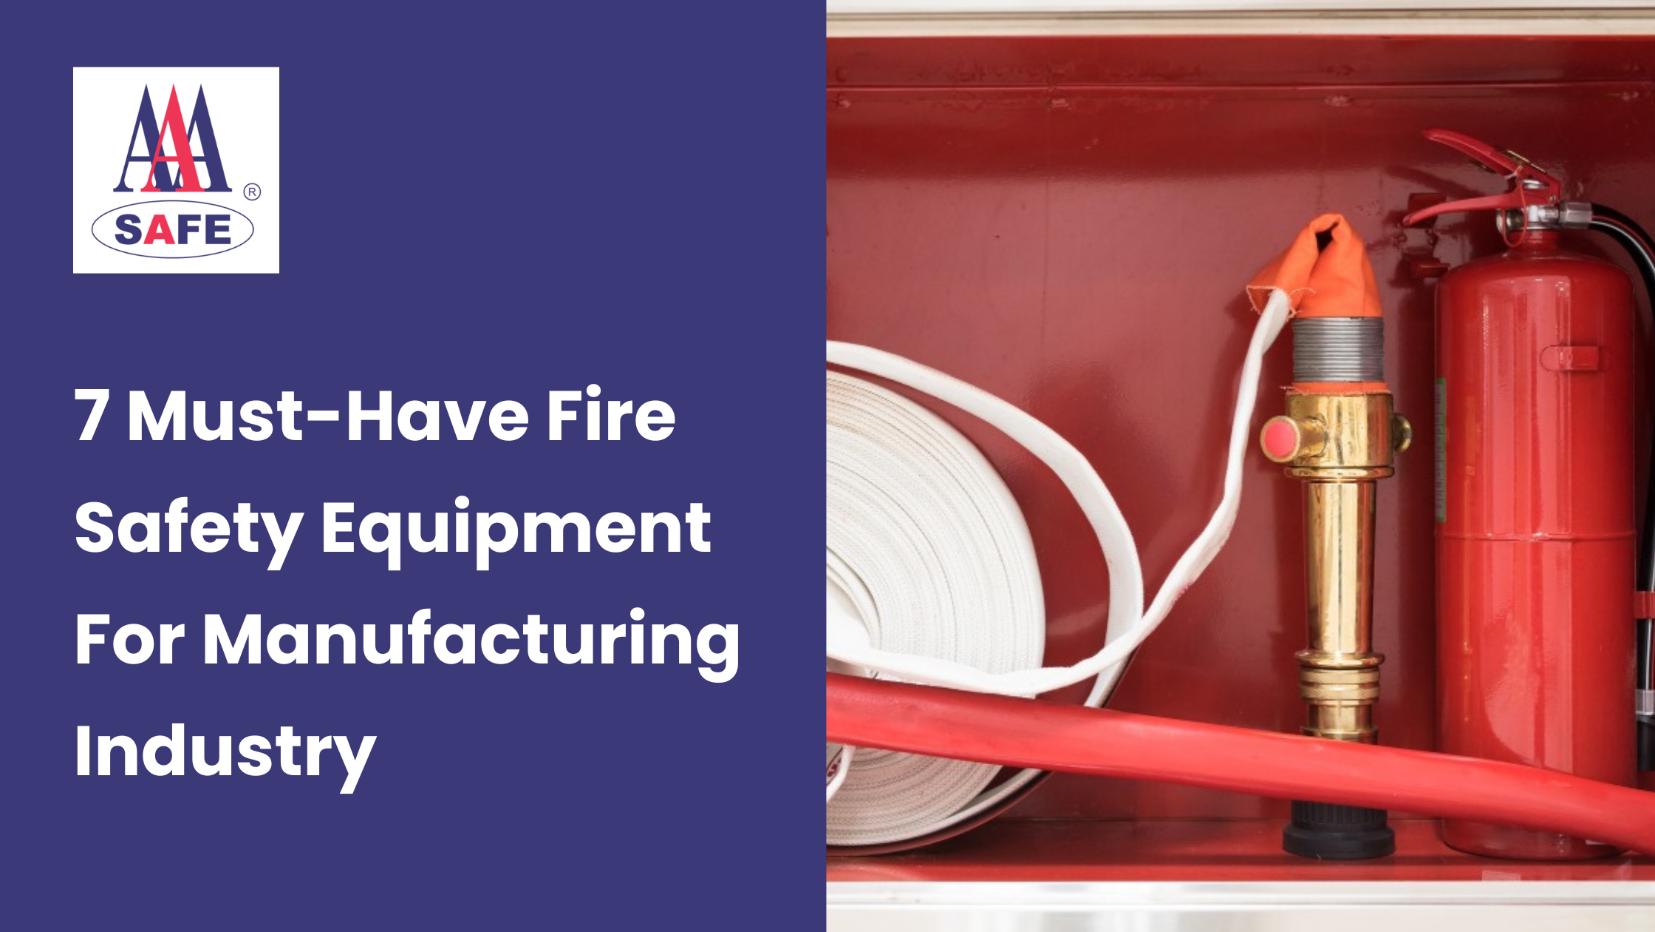 7 Must-Have Fire Safety Equipment For Manufacturing Industry